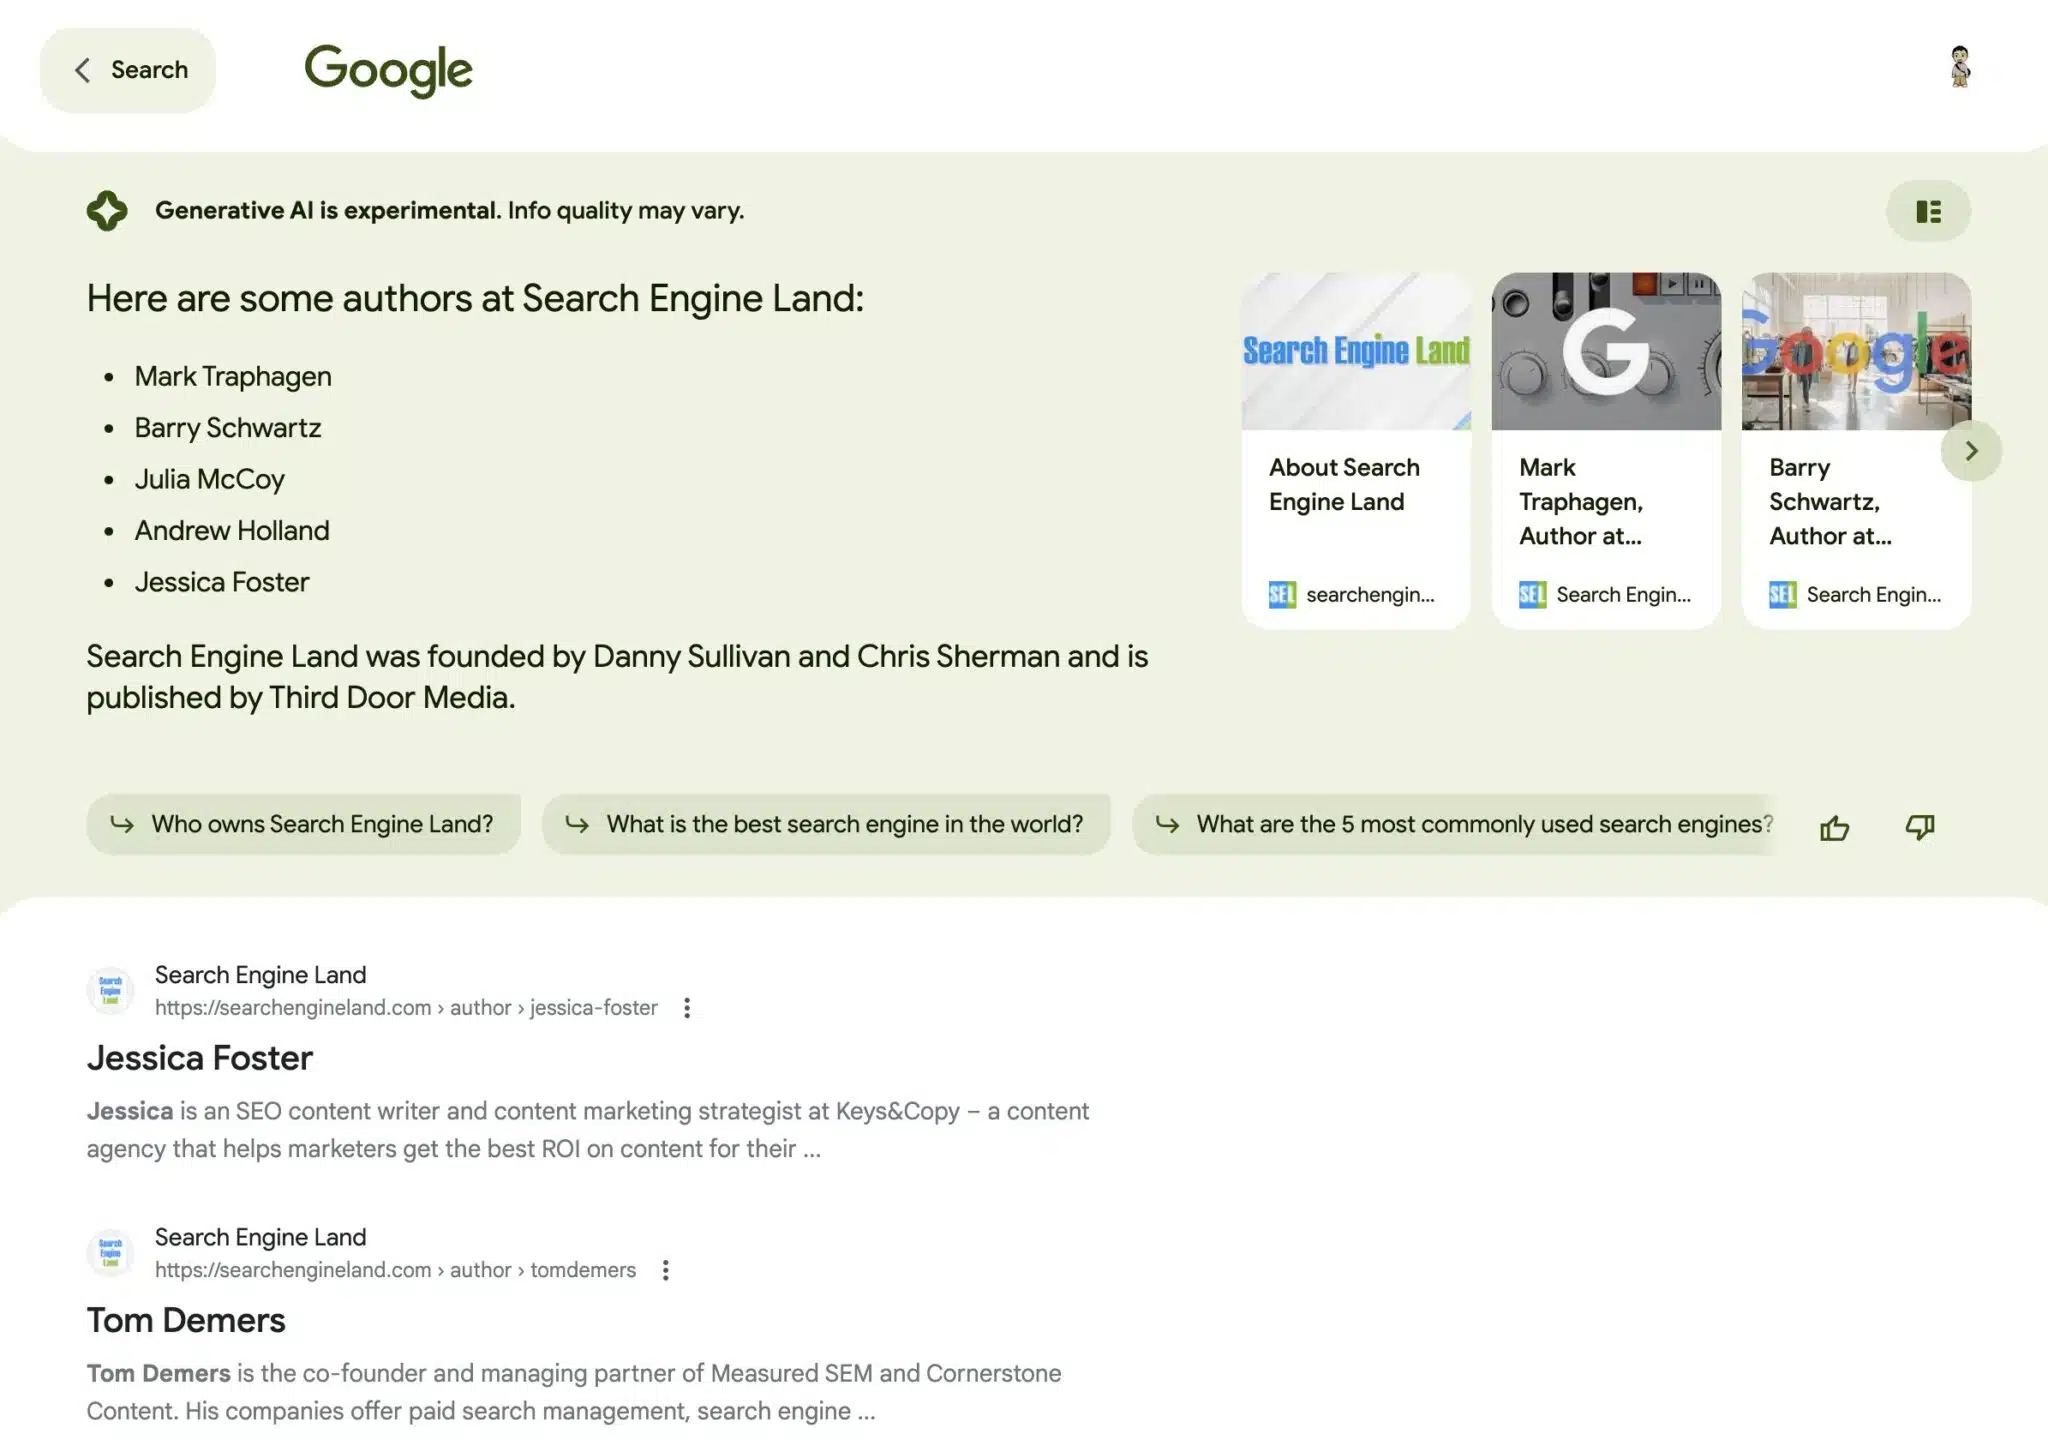 11 Search Engine Land Authors Scaled